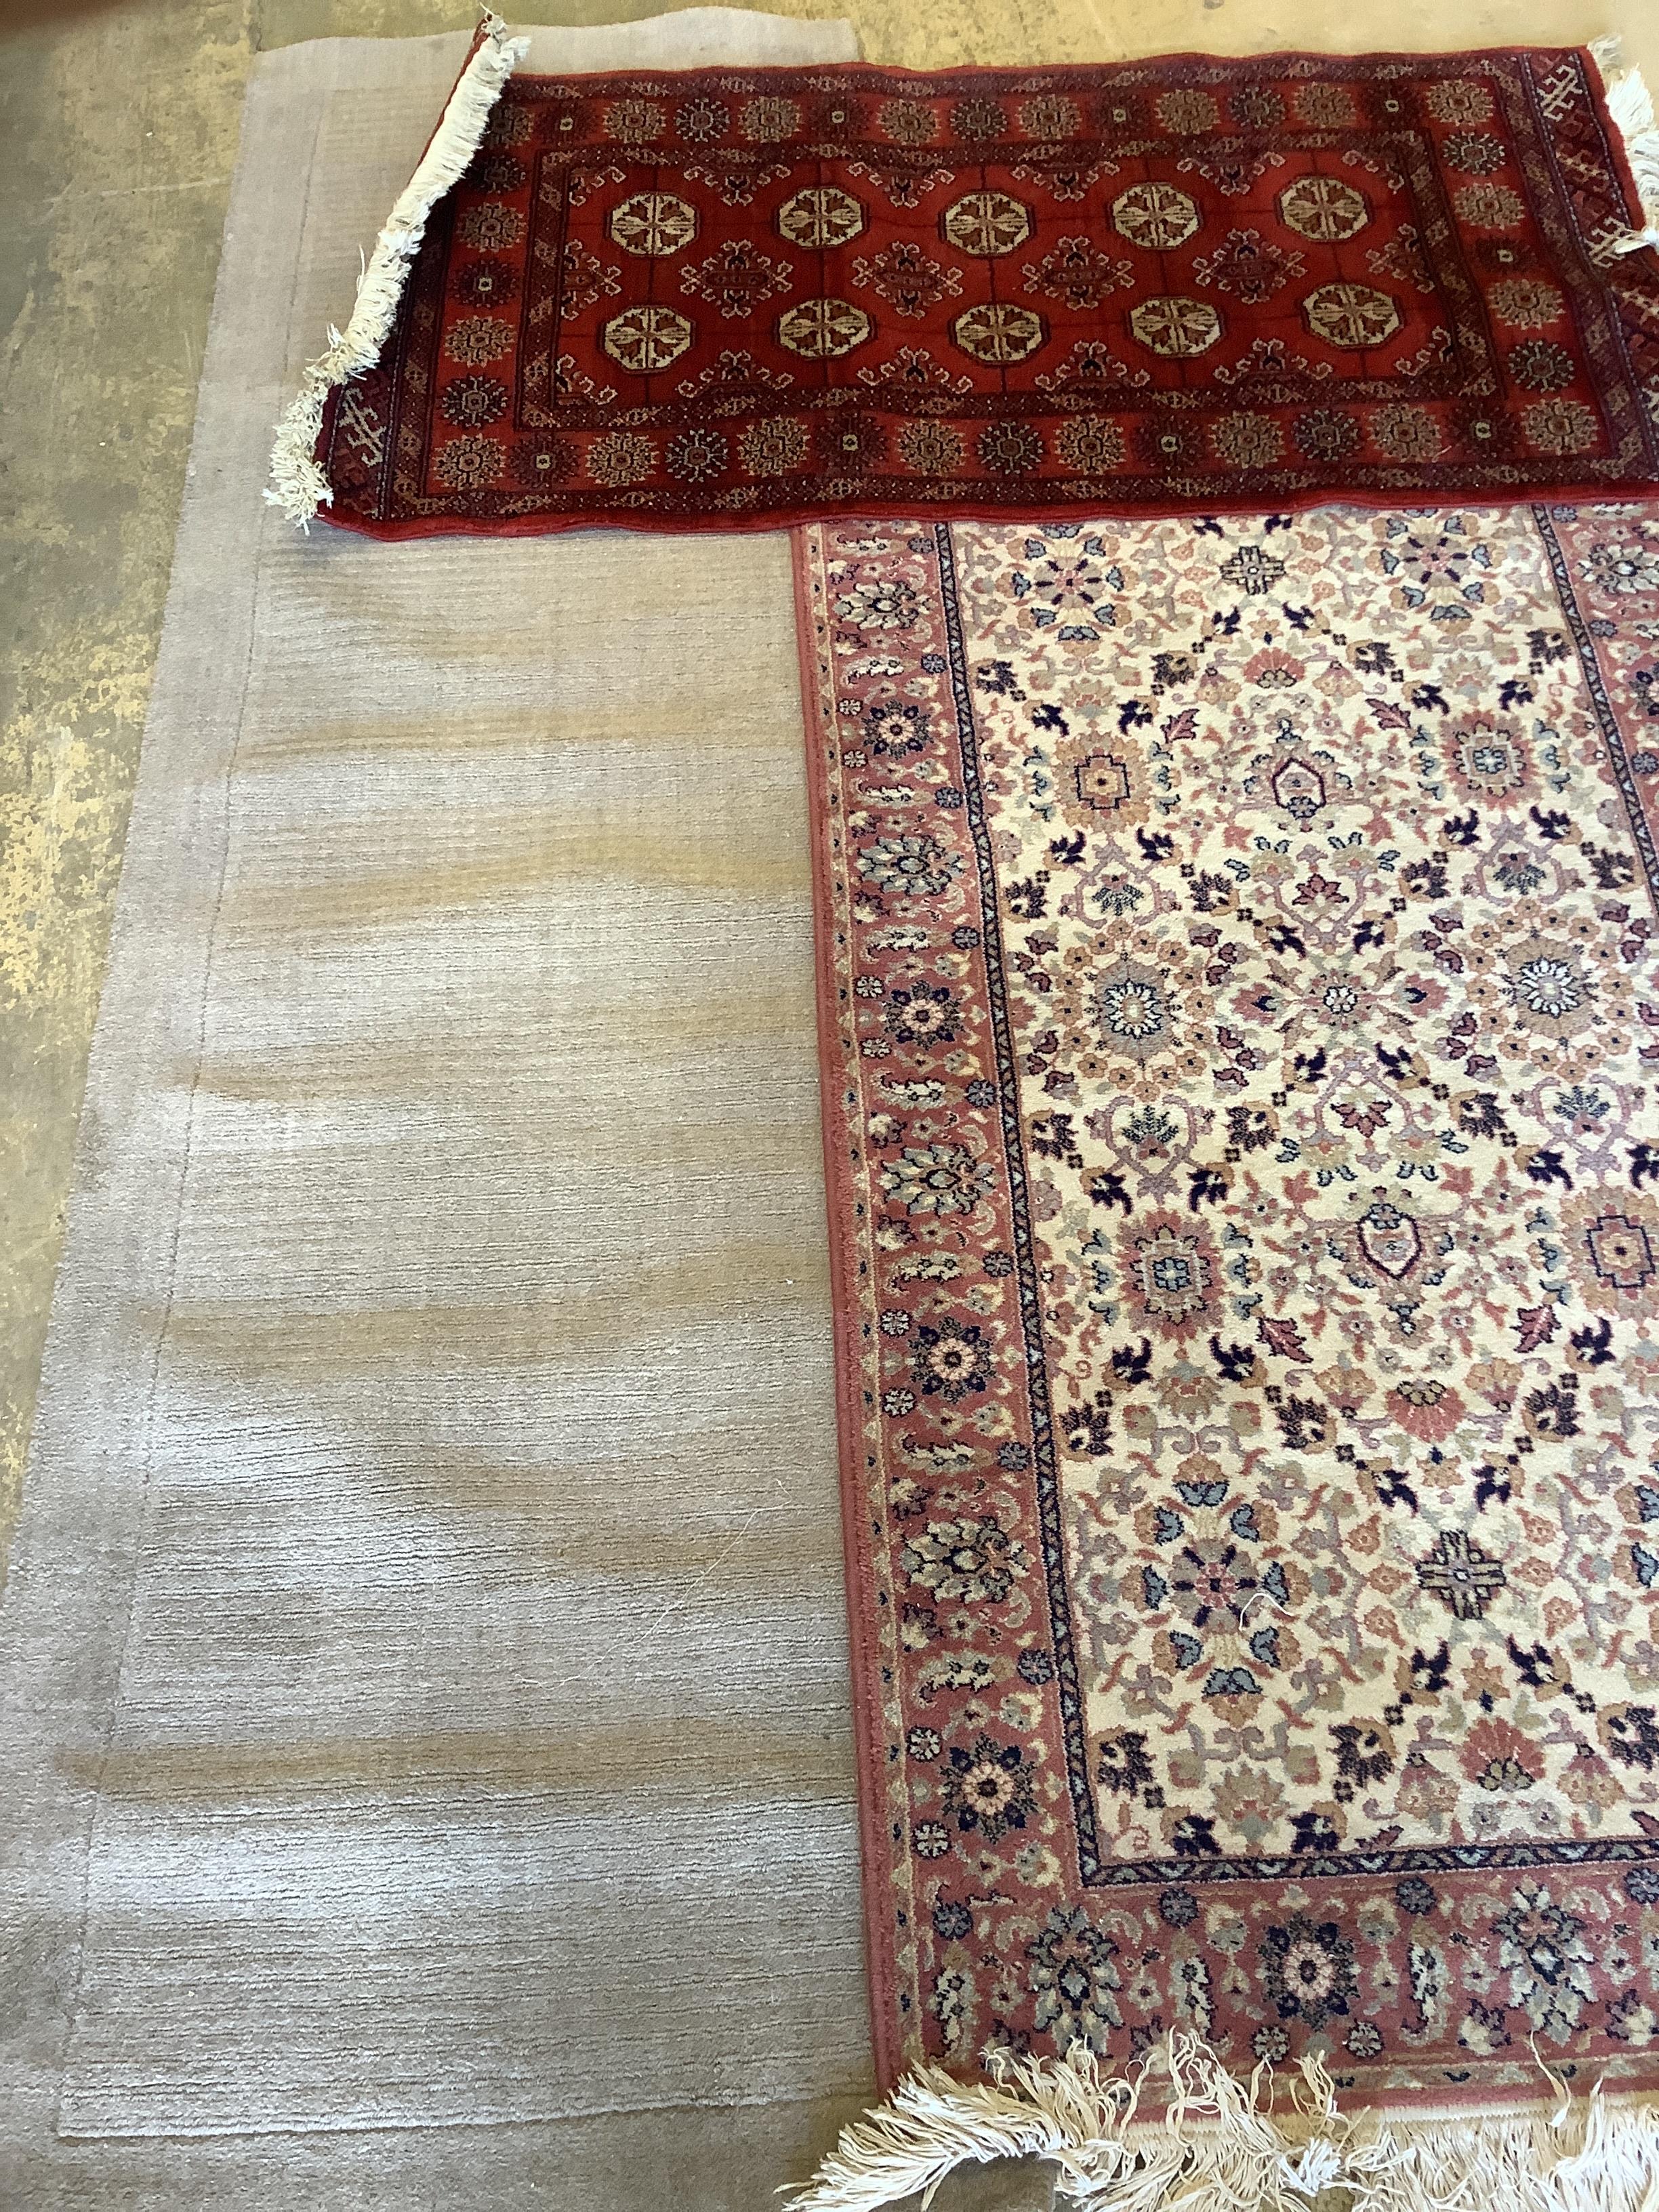 A machined Bokhara style rug, 140 x 72cm together with a North West Persian style rug and a contemporary runner